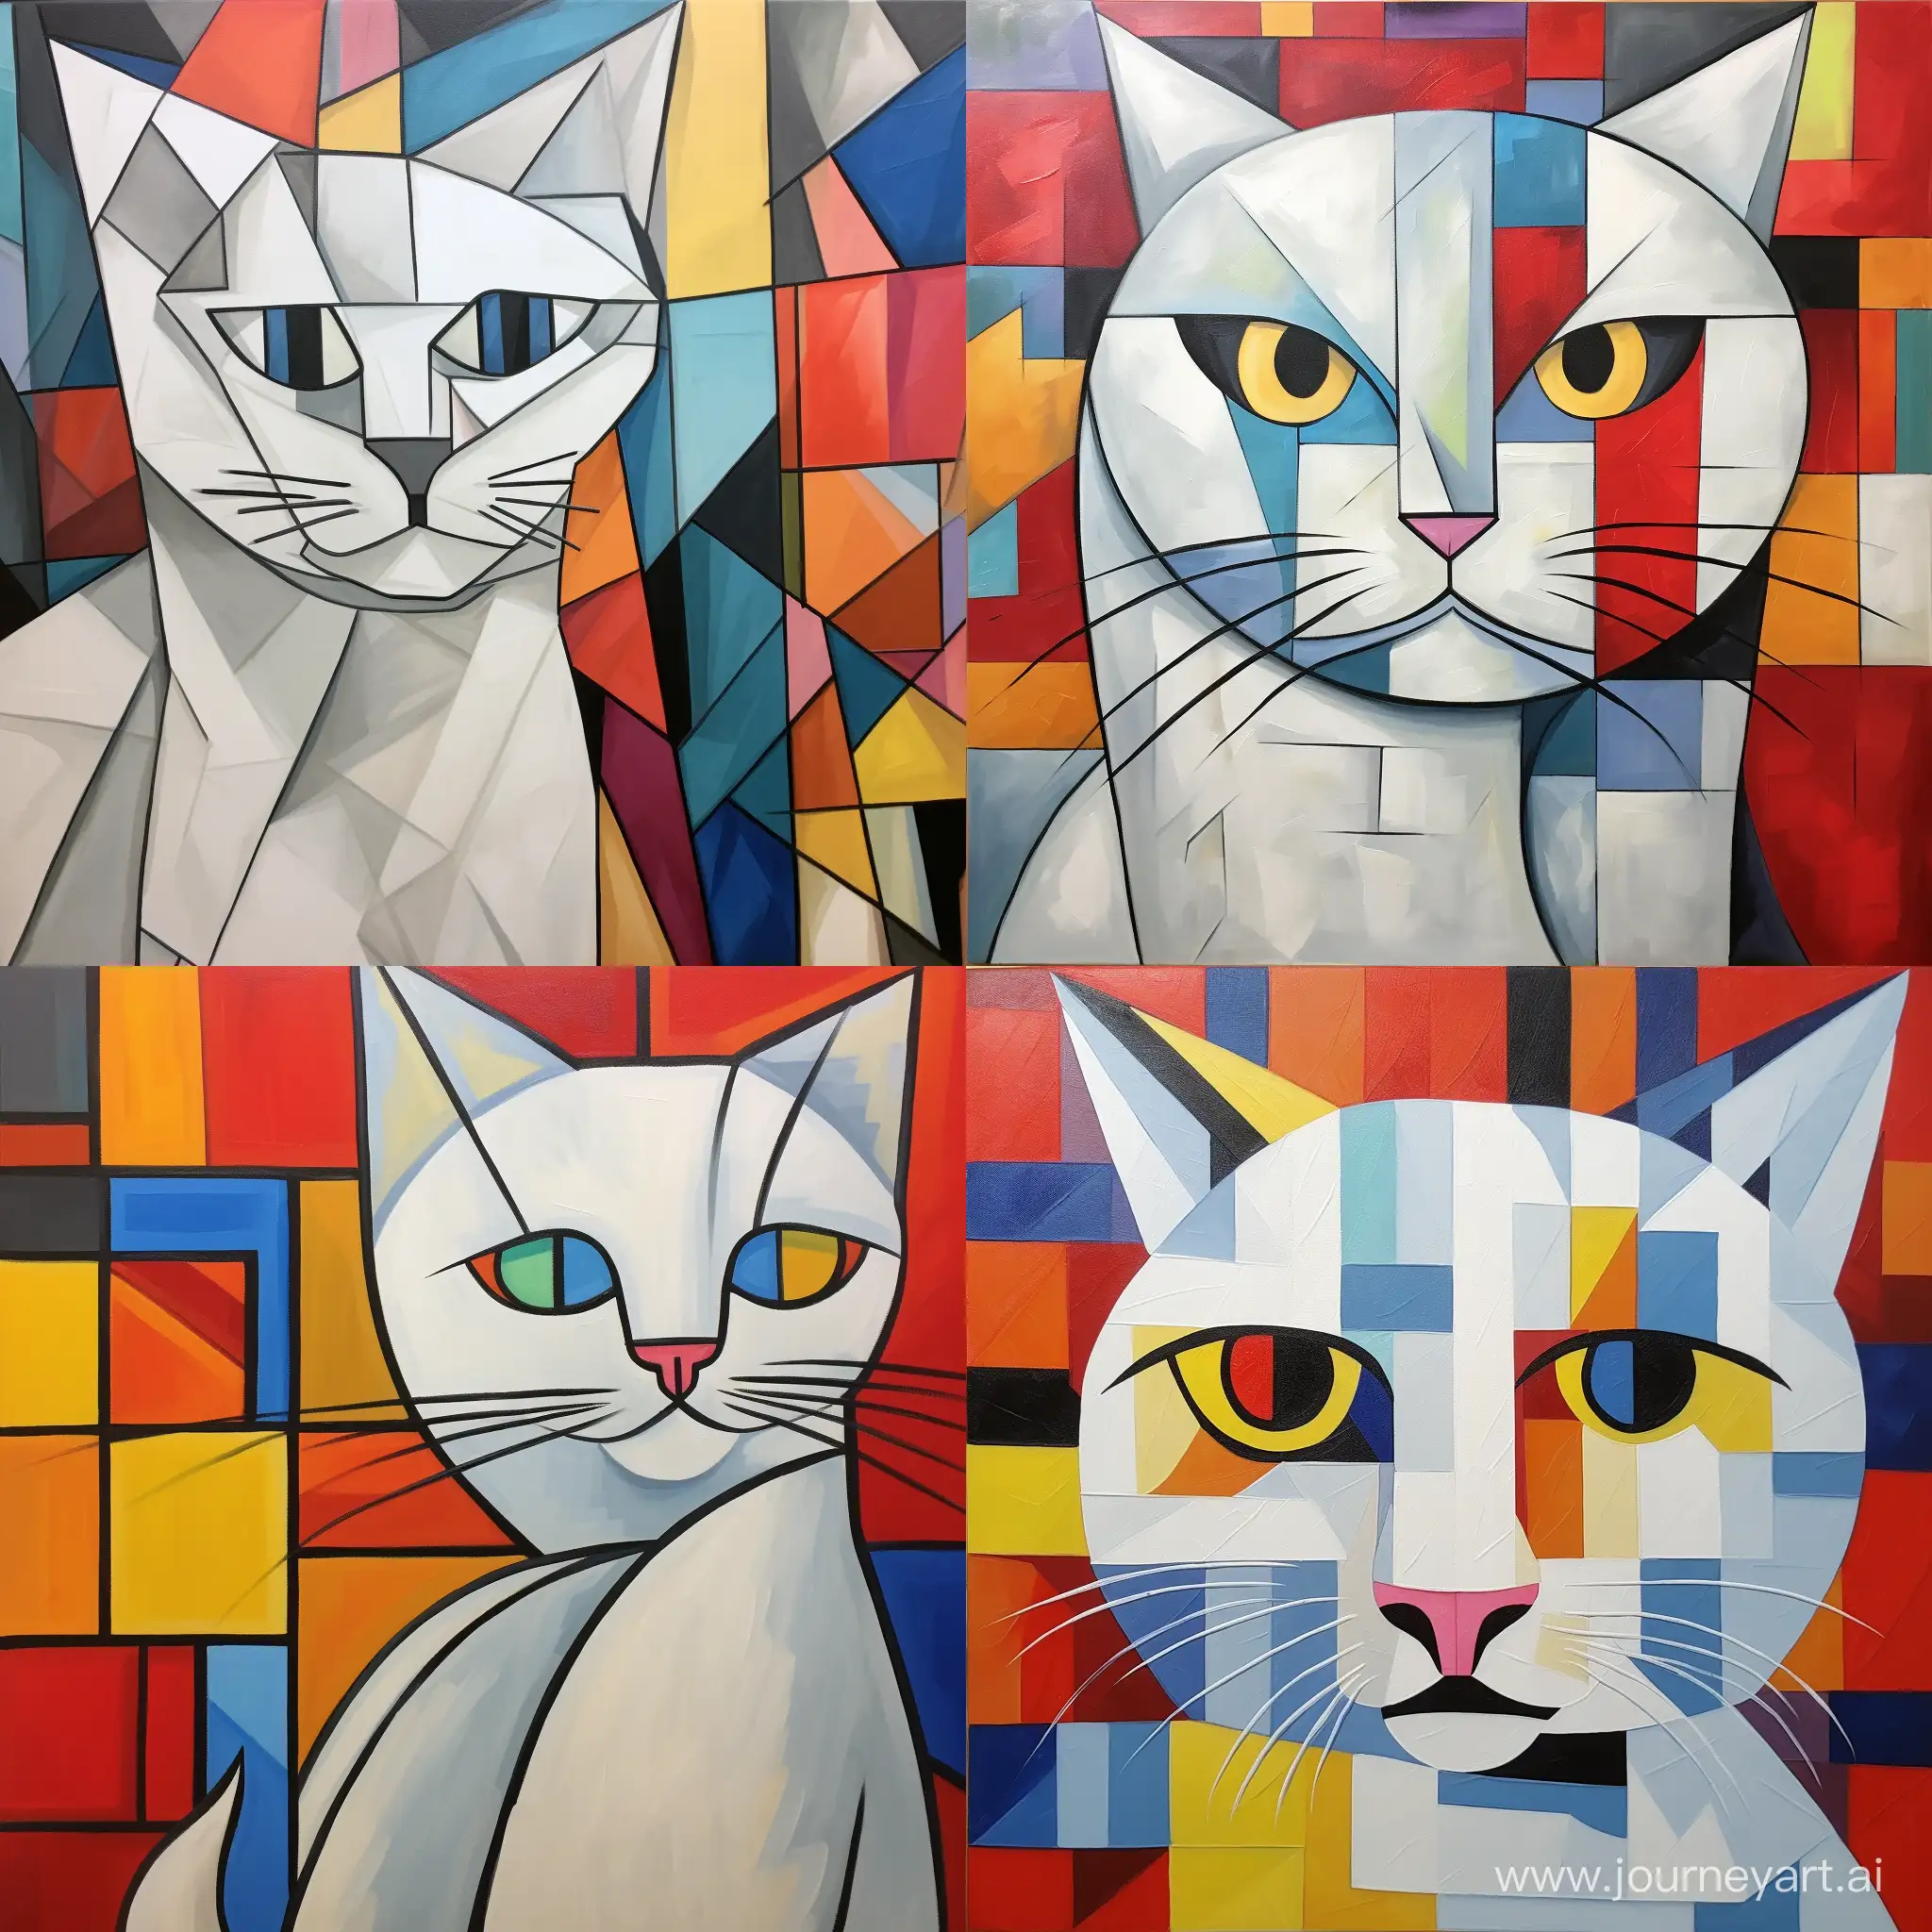 Cubist-Portrayal-of-Simons-White-Cat-Abstract-Artistry-in-a-11-Aspect-Ratio